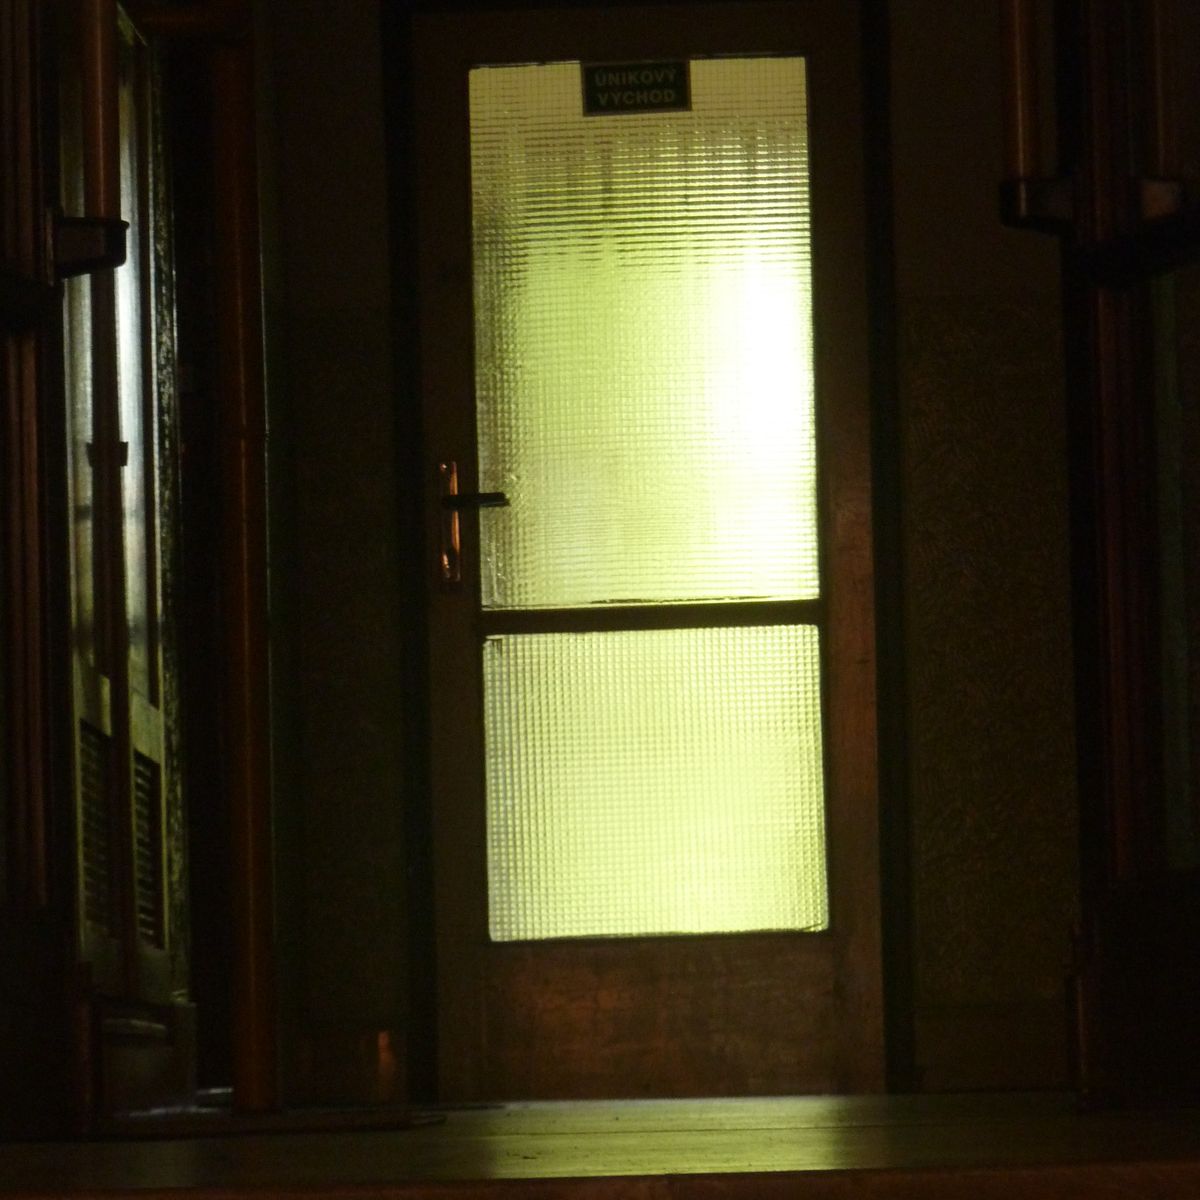 there is a bright yellow light shining in the doorway